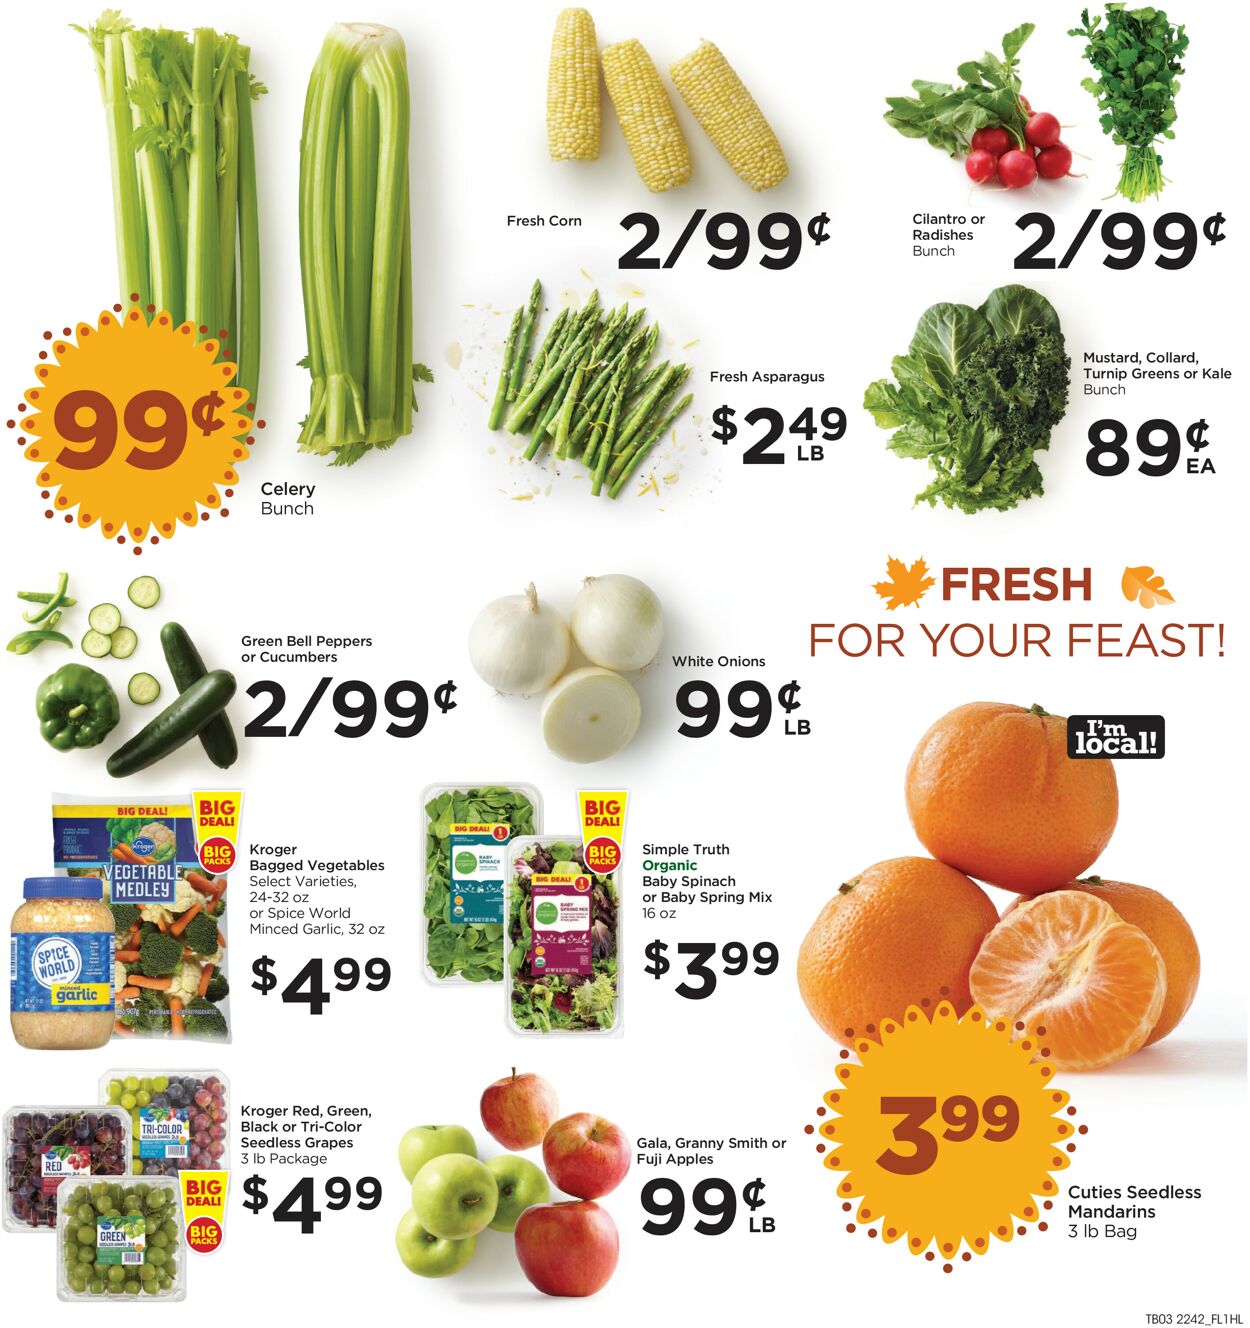 Catalogue Food 4 Less from 11/16/2022